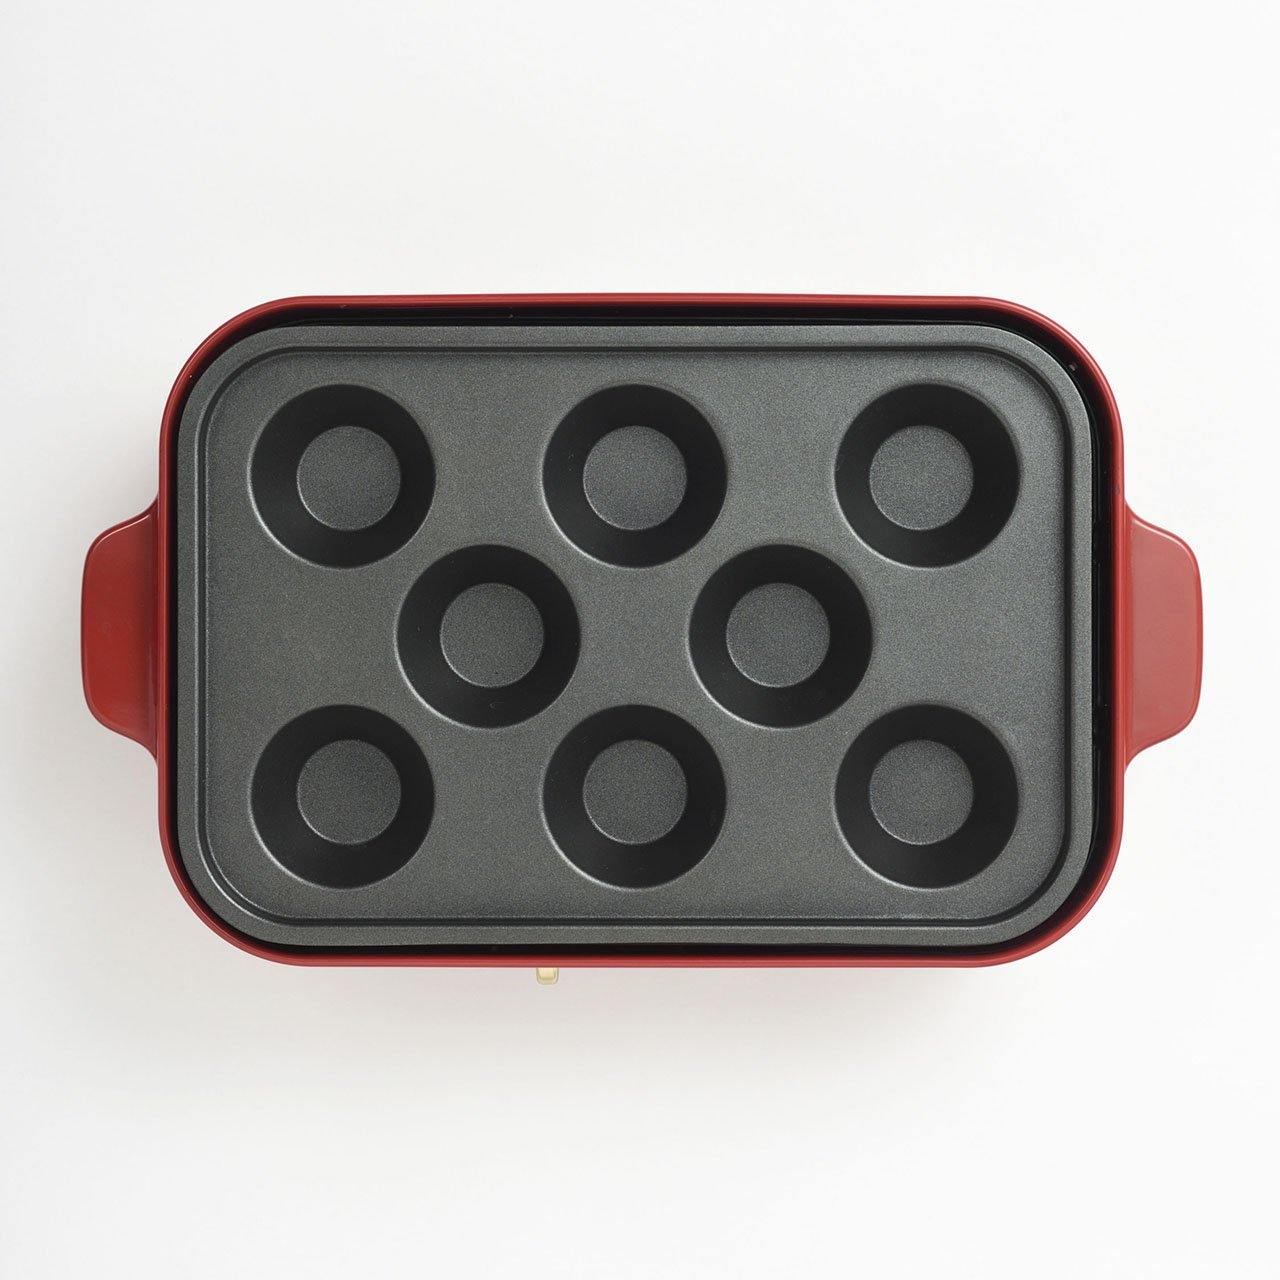 BRUNO Cupcake Plate (for Compact Hot Plate)